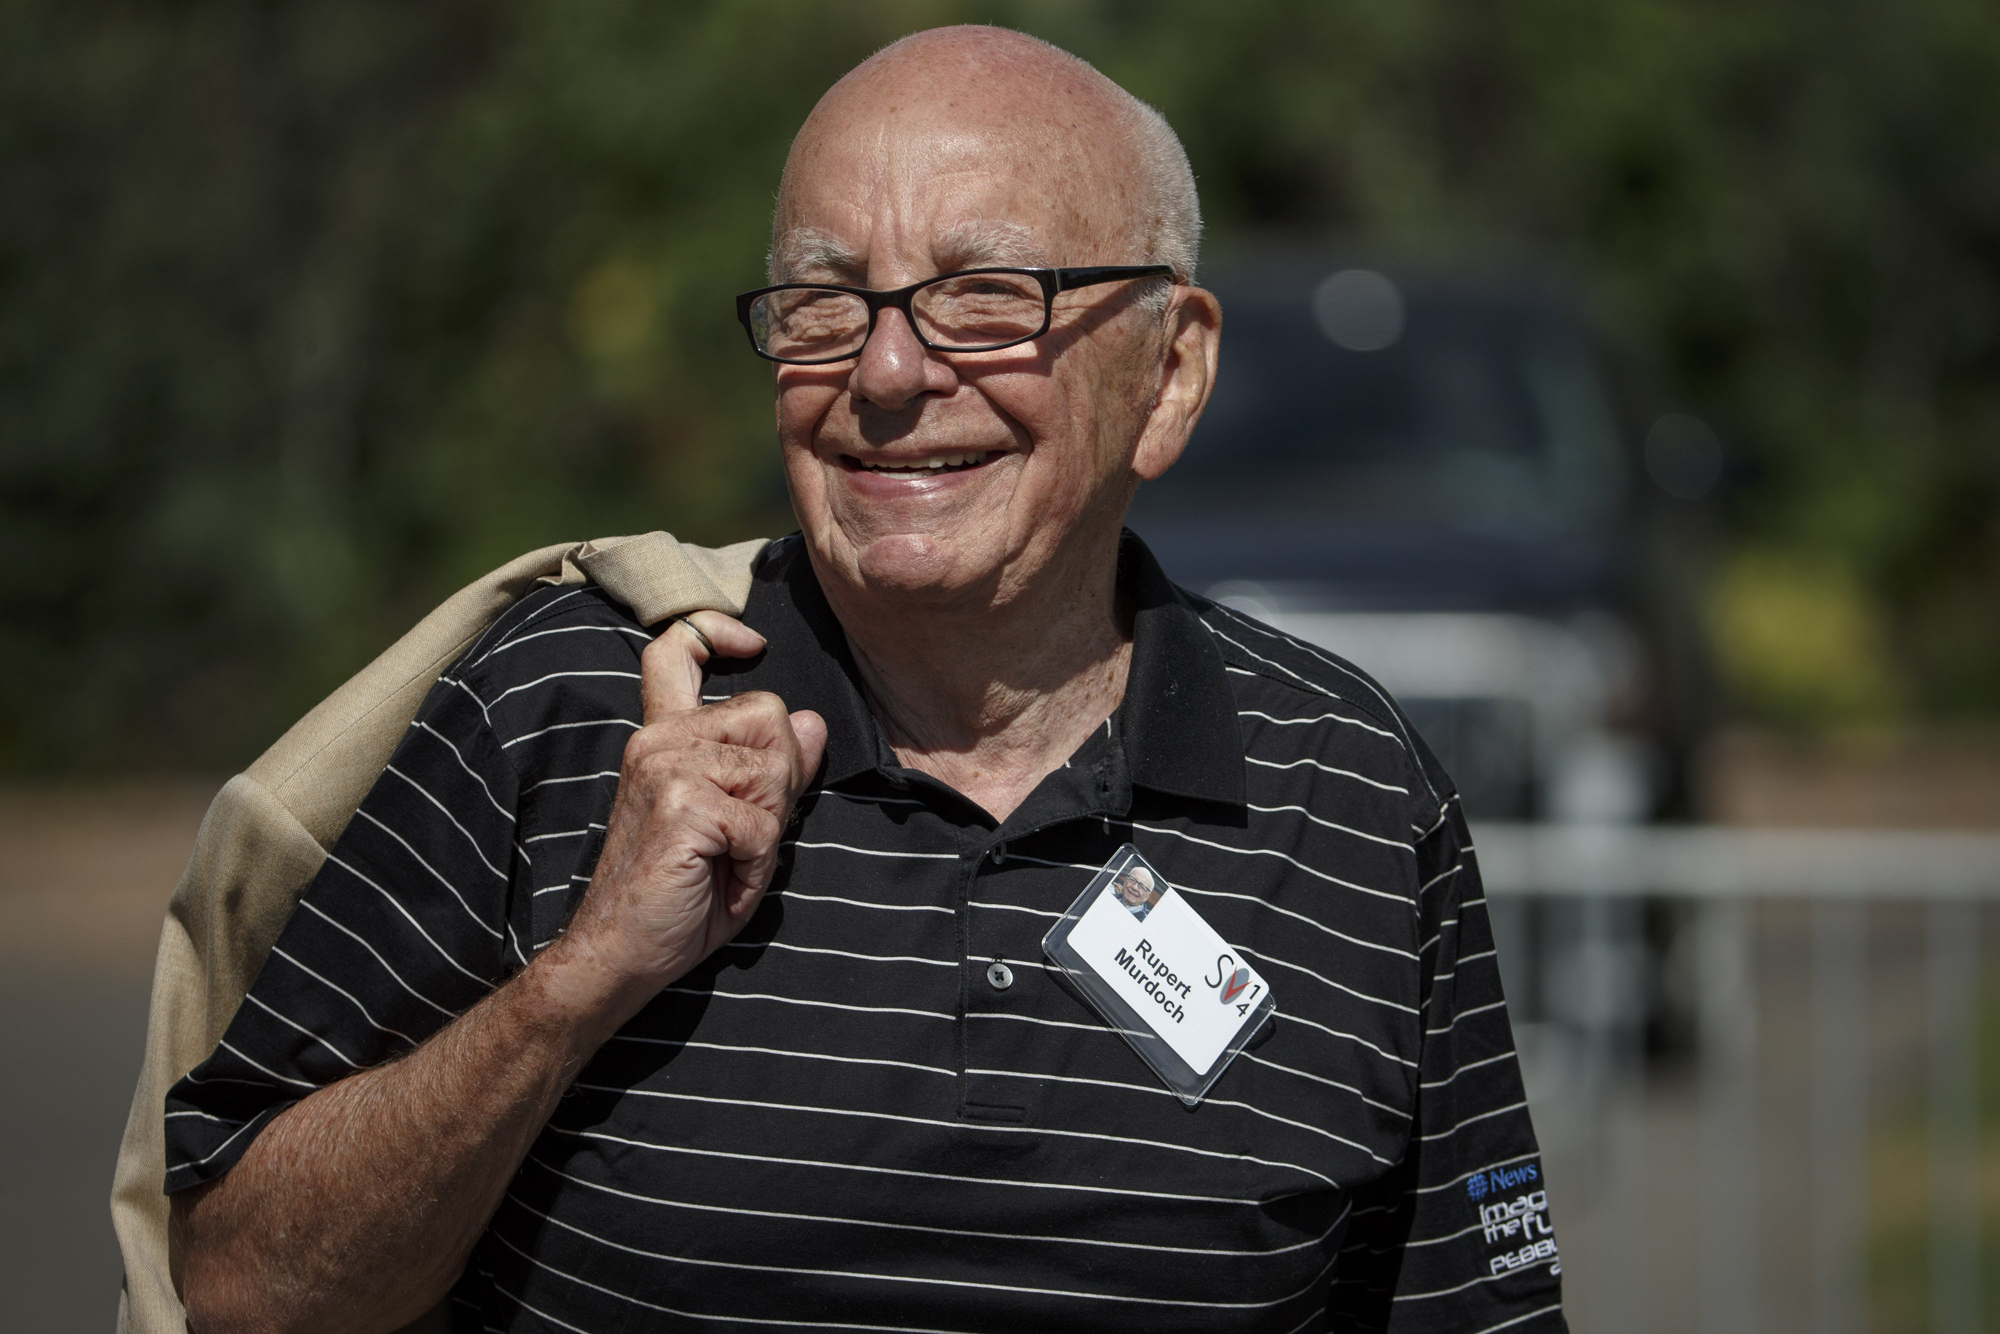 Rupert Murdoch, Executive Chairman of News Corp. and Chairman and CEO of 21st Century Fox, attends the Allen &amp; Co. 32nd annual Media and Technology Conference, in Sun Valley, Idaho, July 10, 2014.